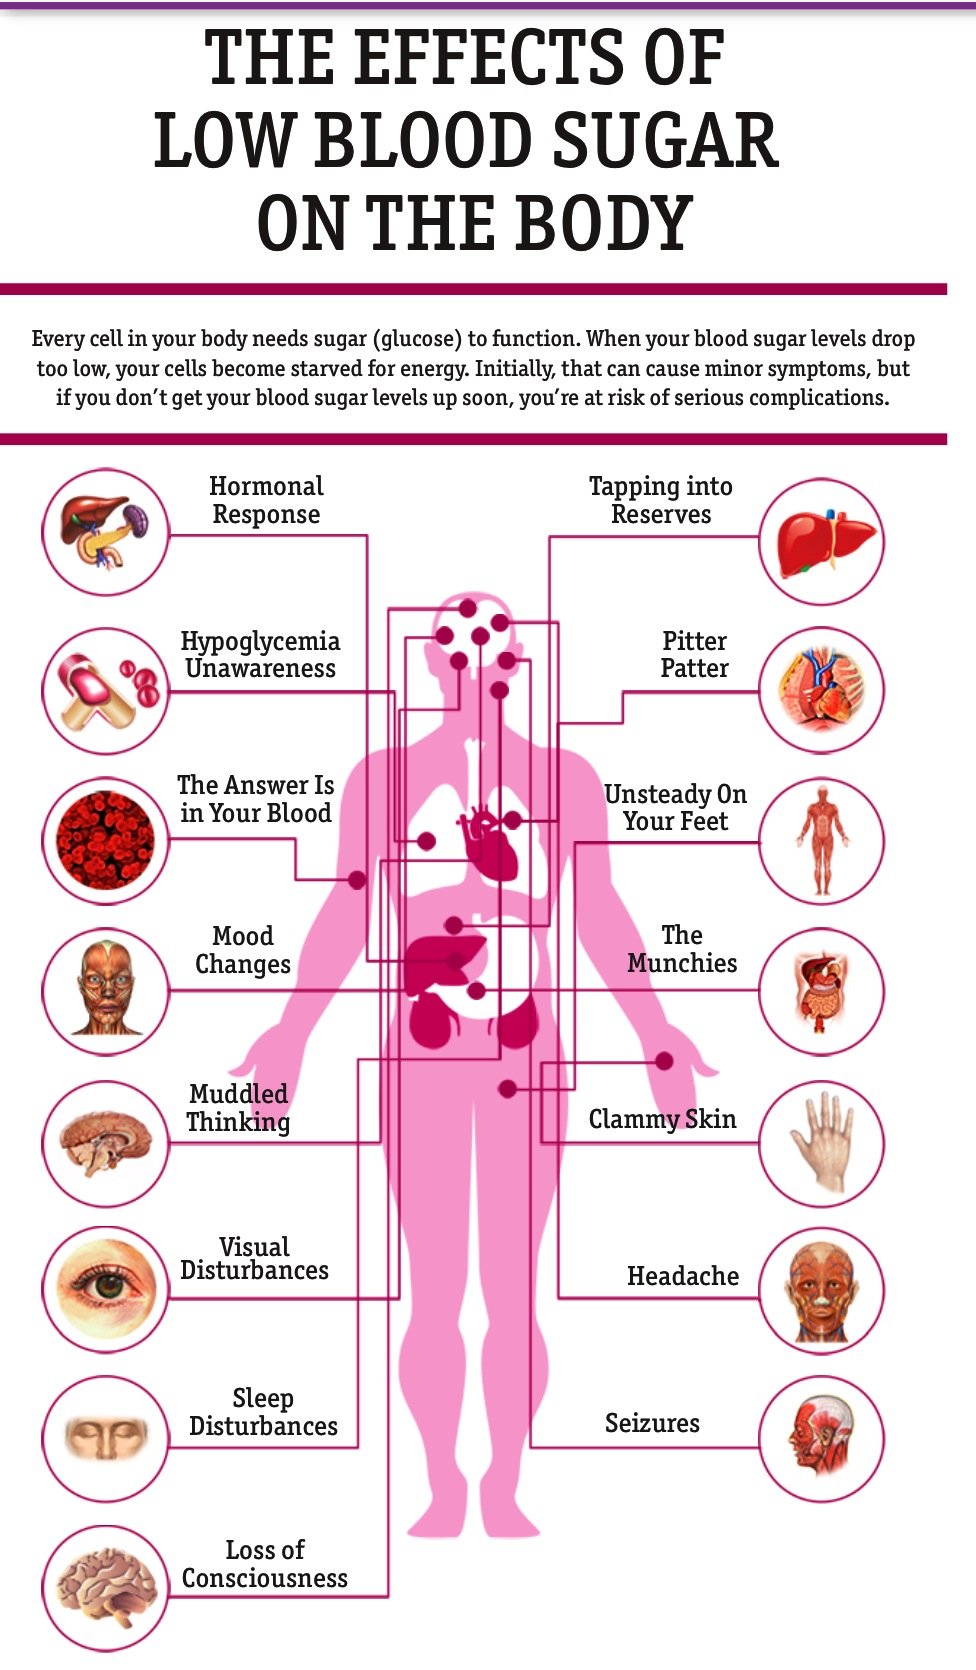 Effects of Low Blood Sugar on the Body